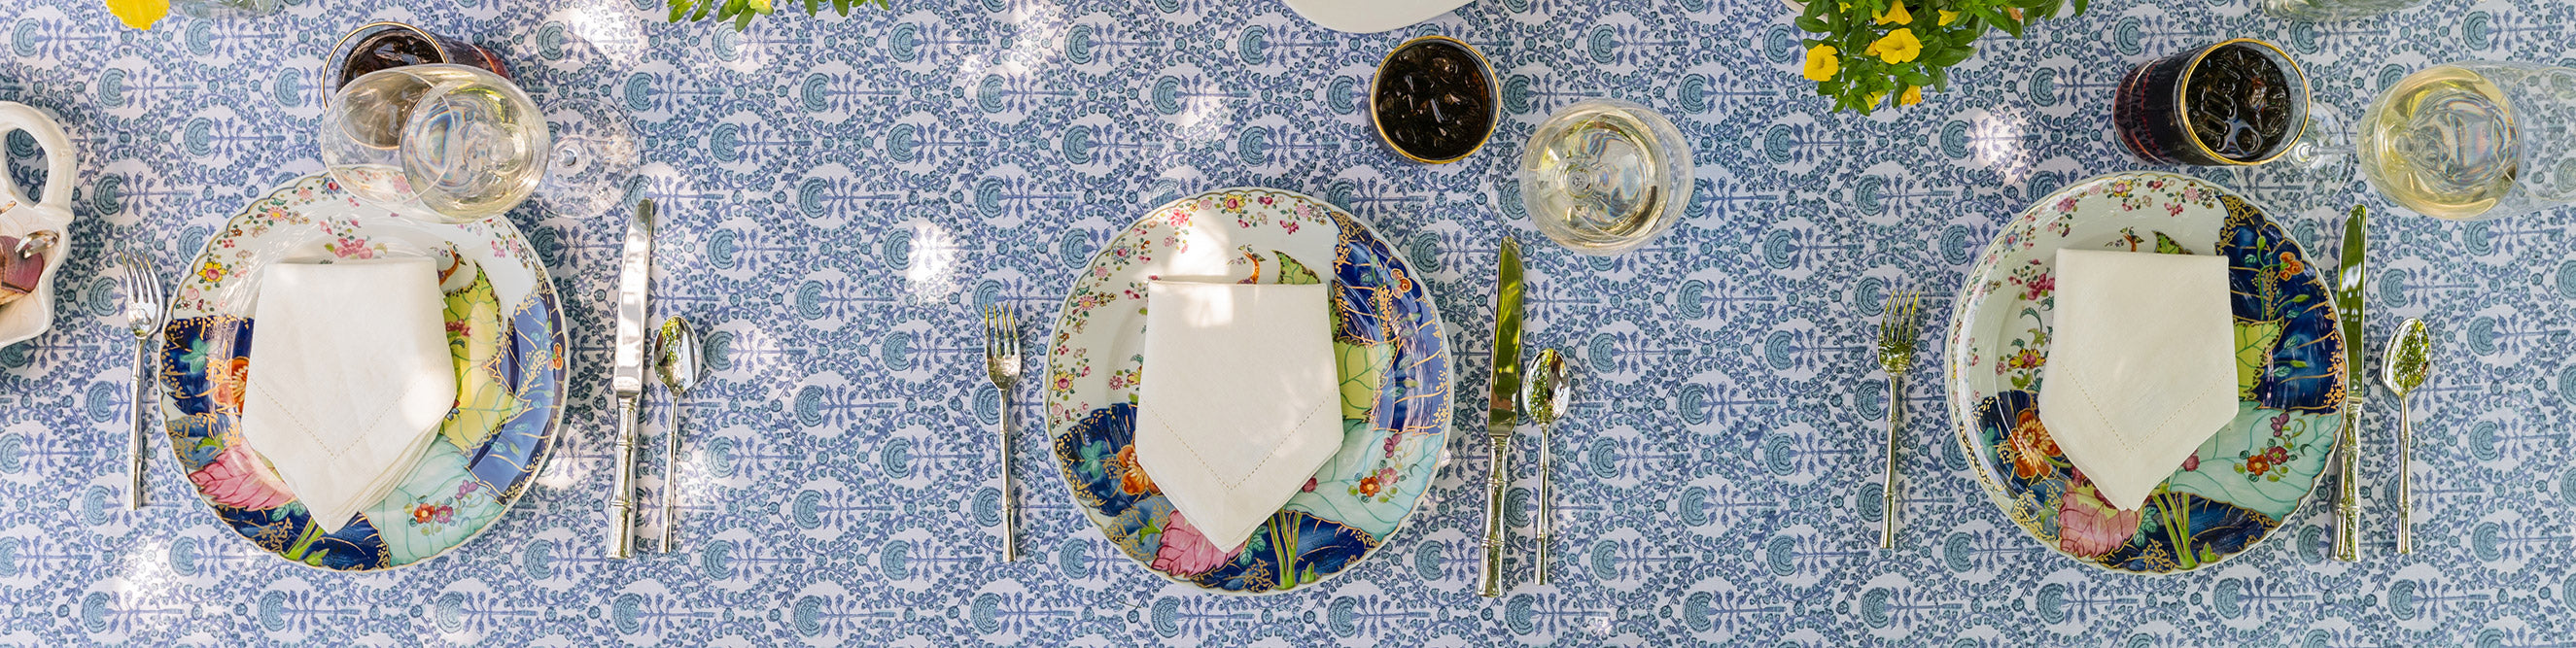 classic hand block printed table linens